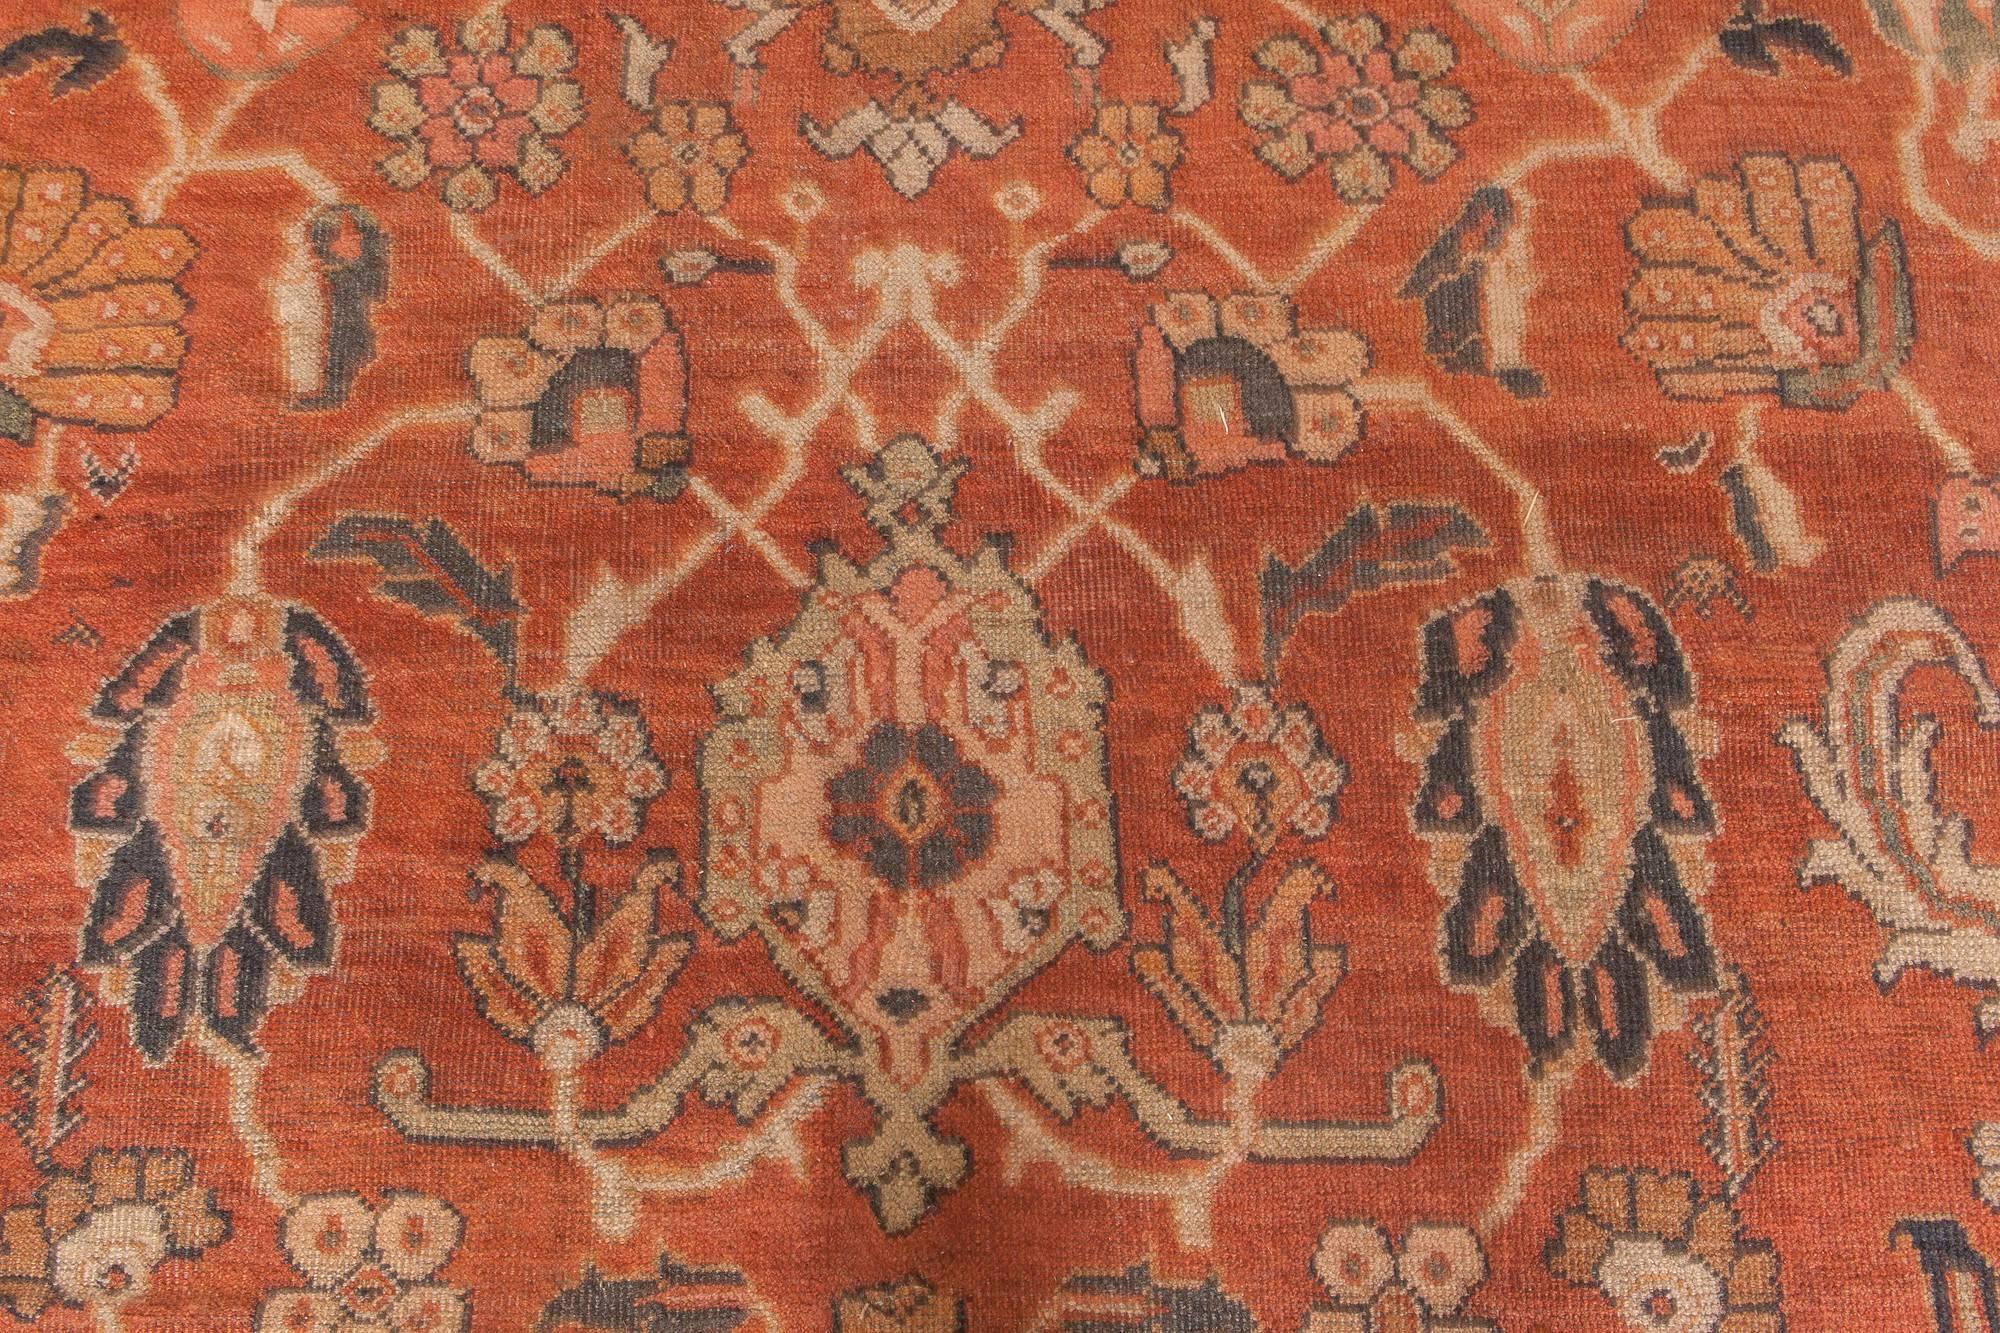 Antique Persian Sultanabad Handwoven Carpet
Size: 12'8